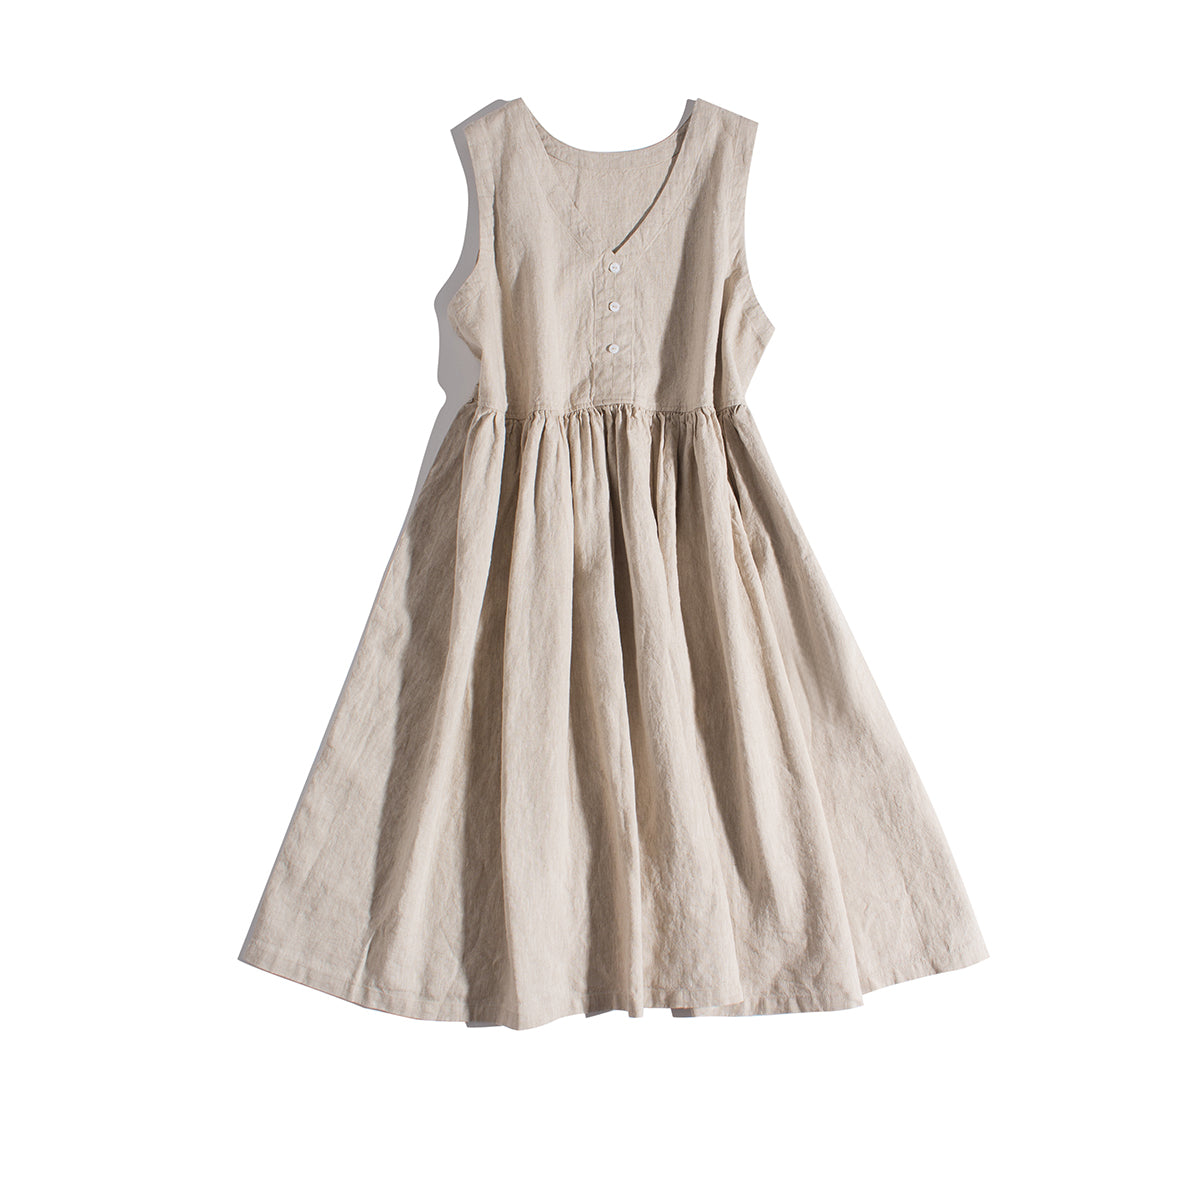 Natural Grove Sleeveless Casual 100% Linen Dress | Hypoallergenic - Allergy Friendly - Naturally Free